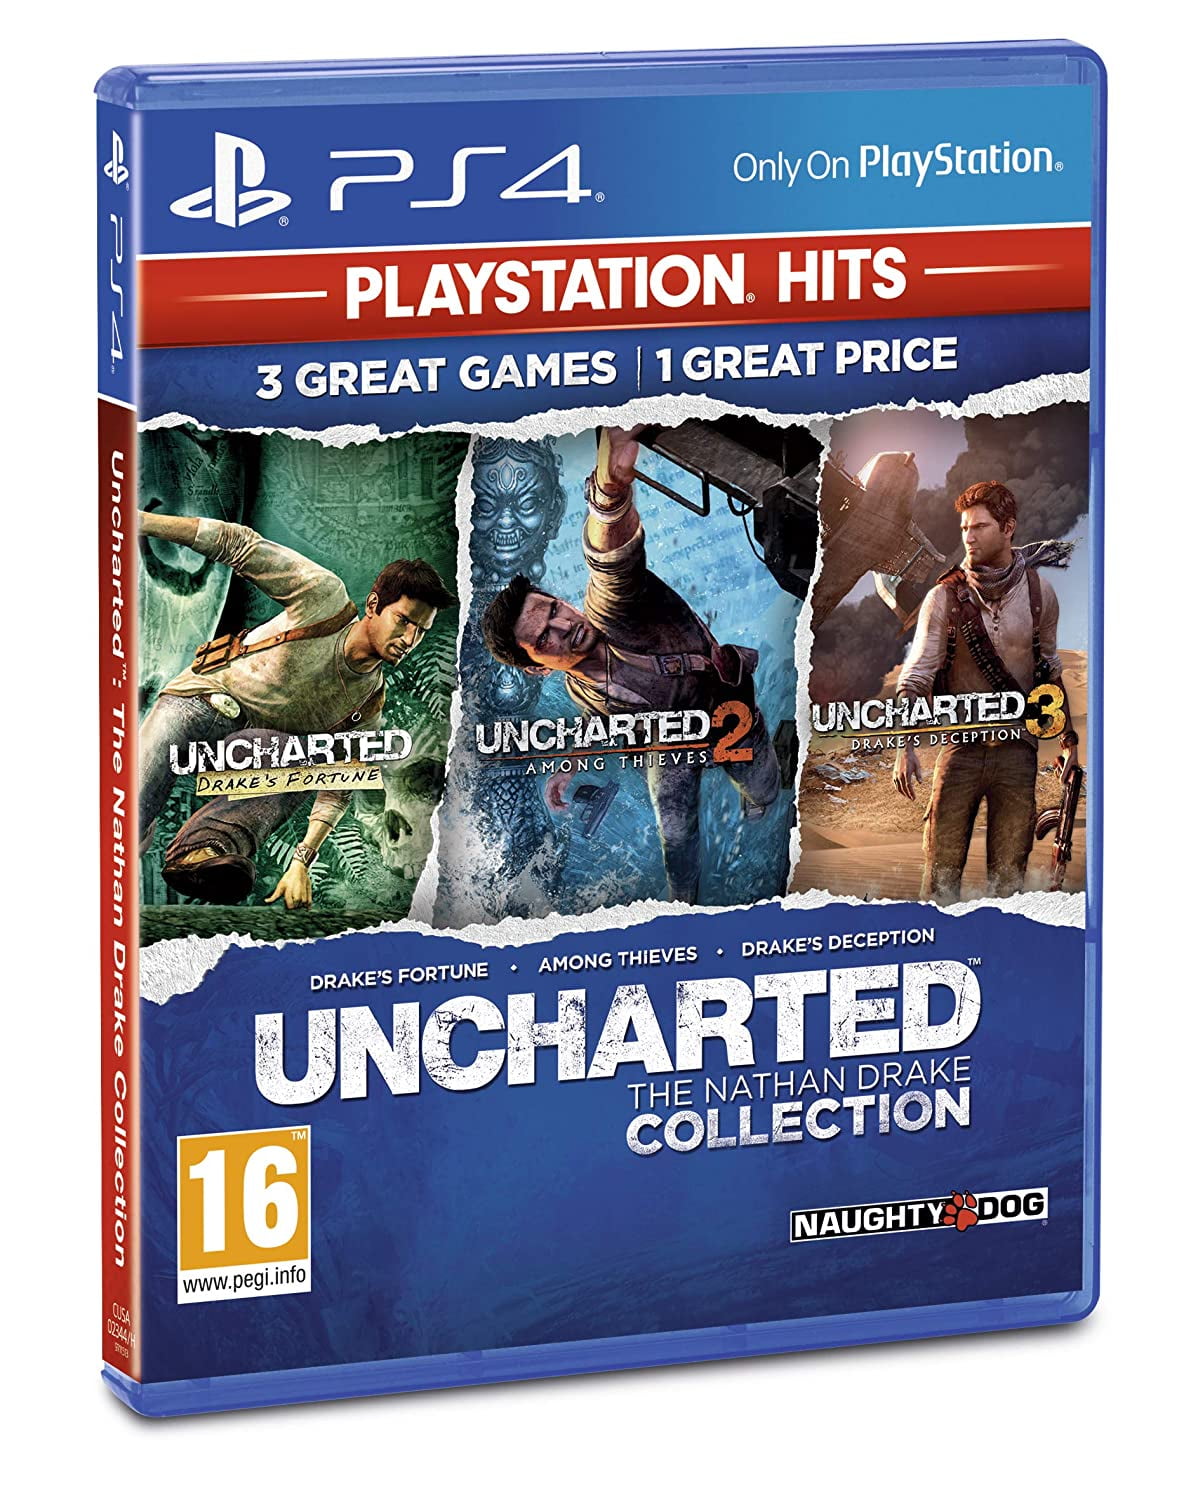 tunge Arab Reklame Uncharted The Nathan Drake Collection (Playstation 4 / PS4) 3 Great Games!  - Walmart.com